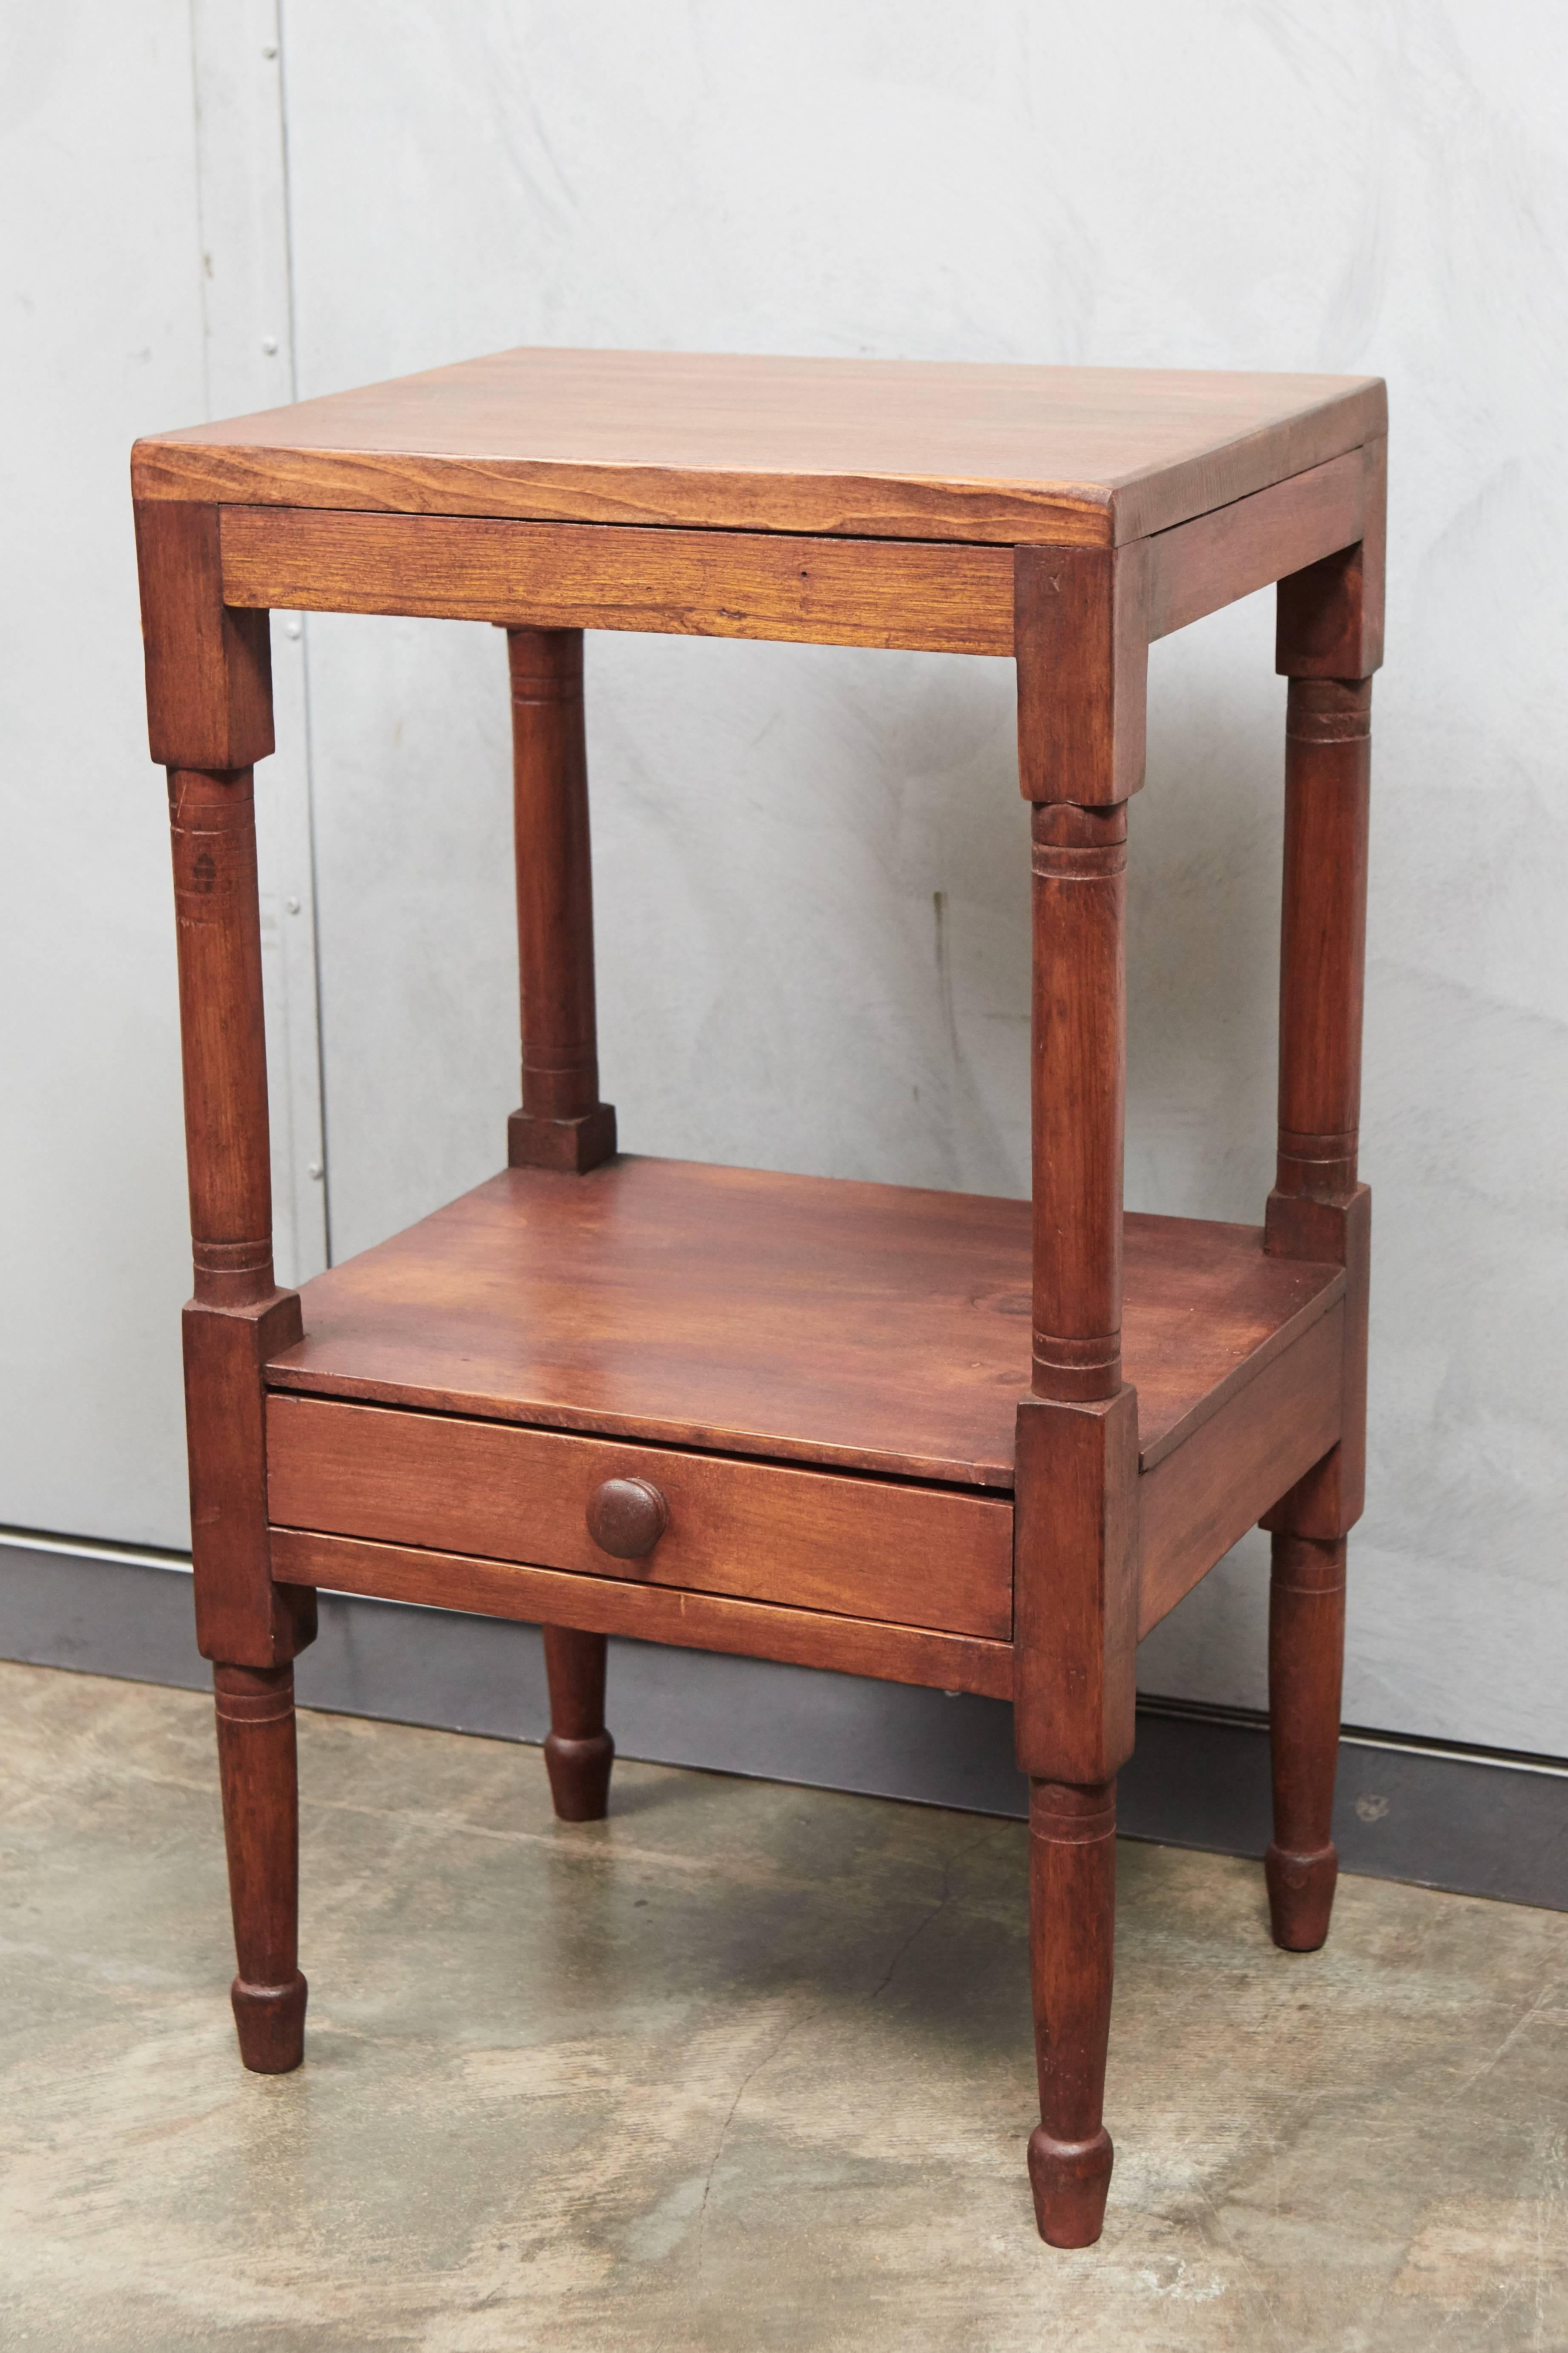 This nice little pine wash stand has turned legs and feet and one drawer in the lower shelf. The piece has a replaced top and is ready for use in a variety of settings.